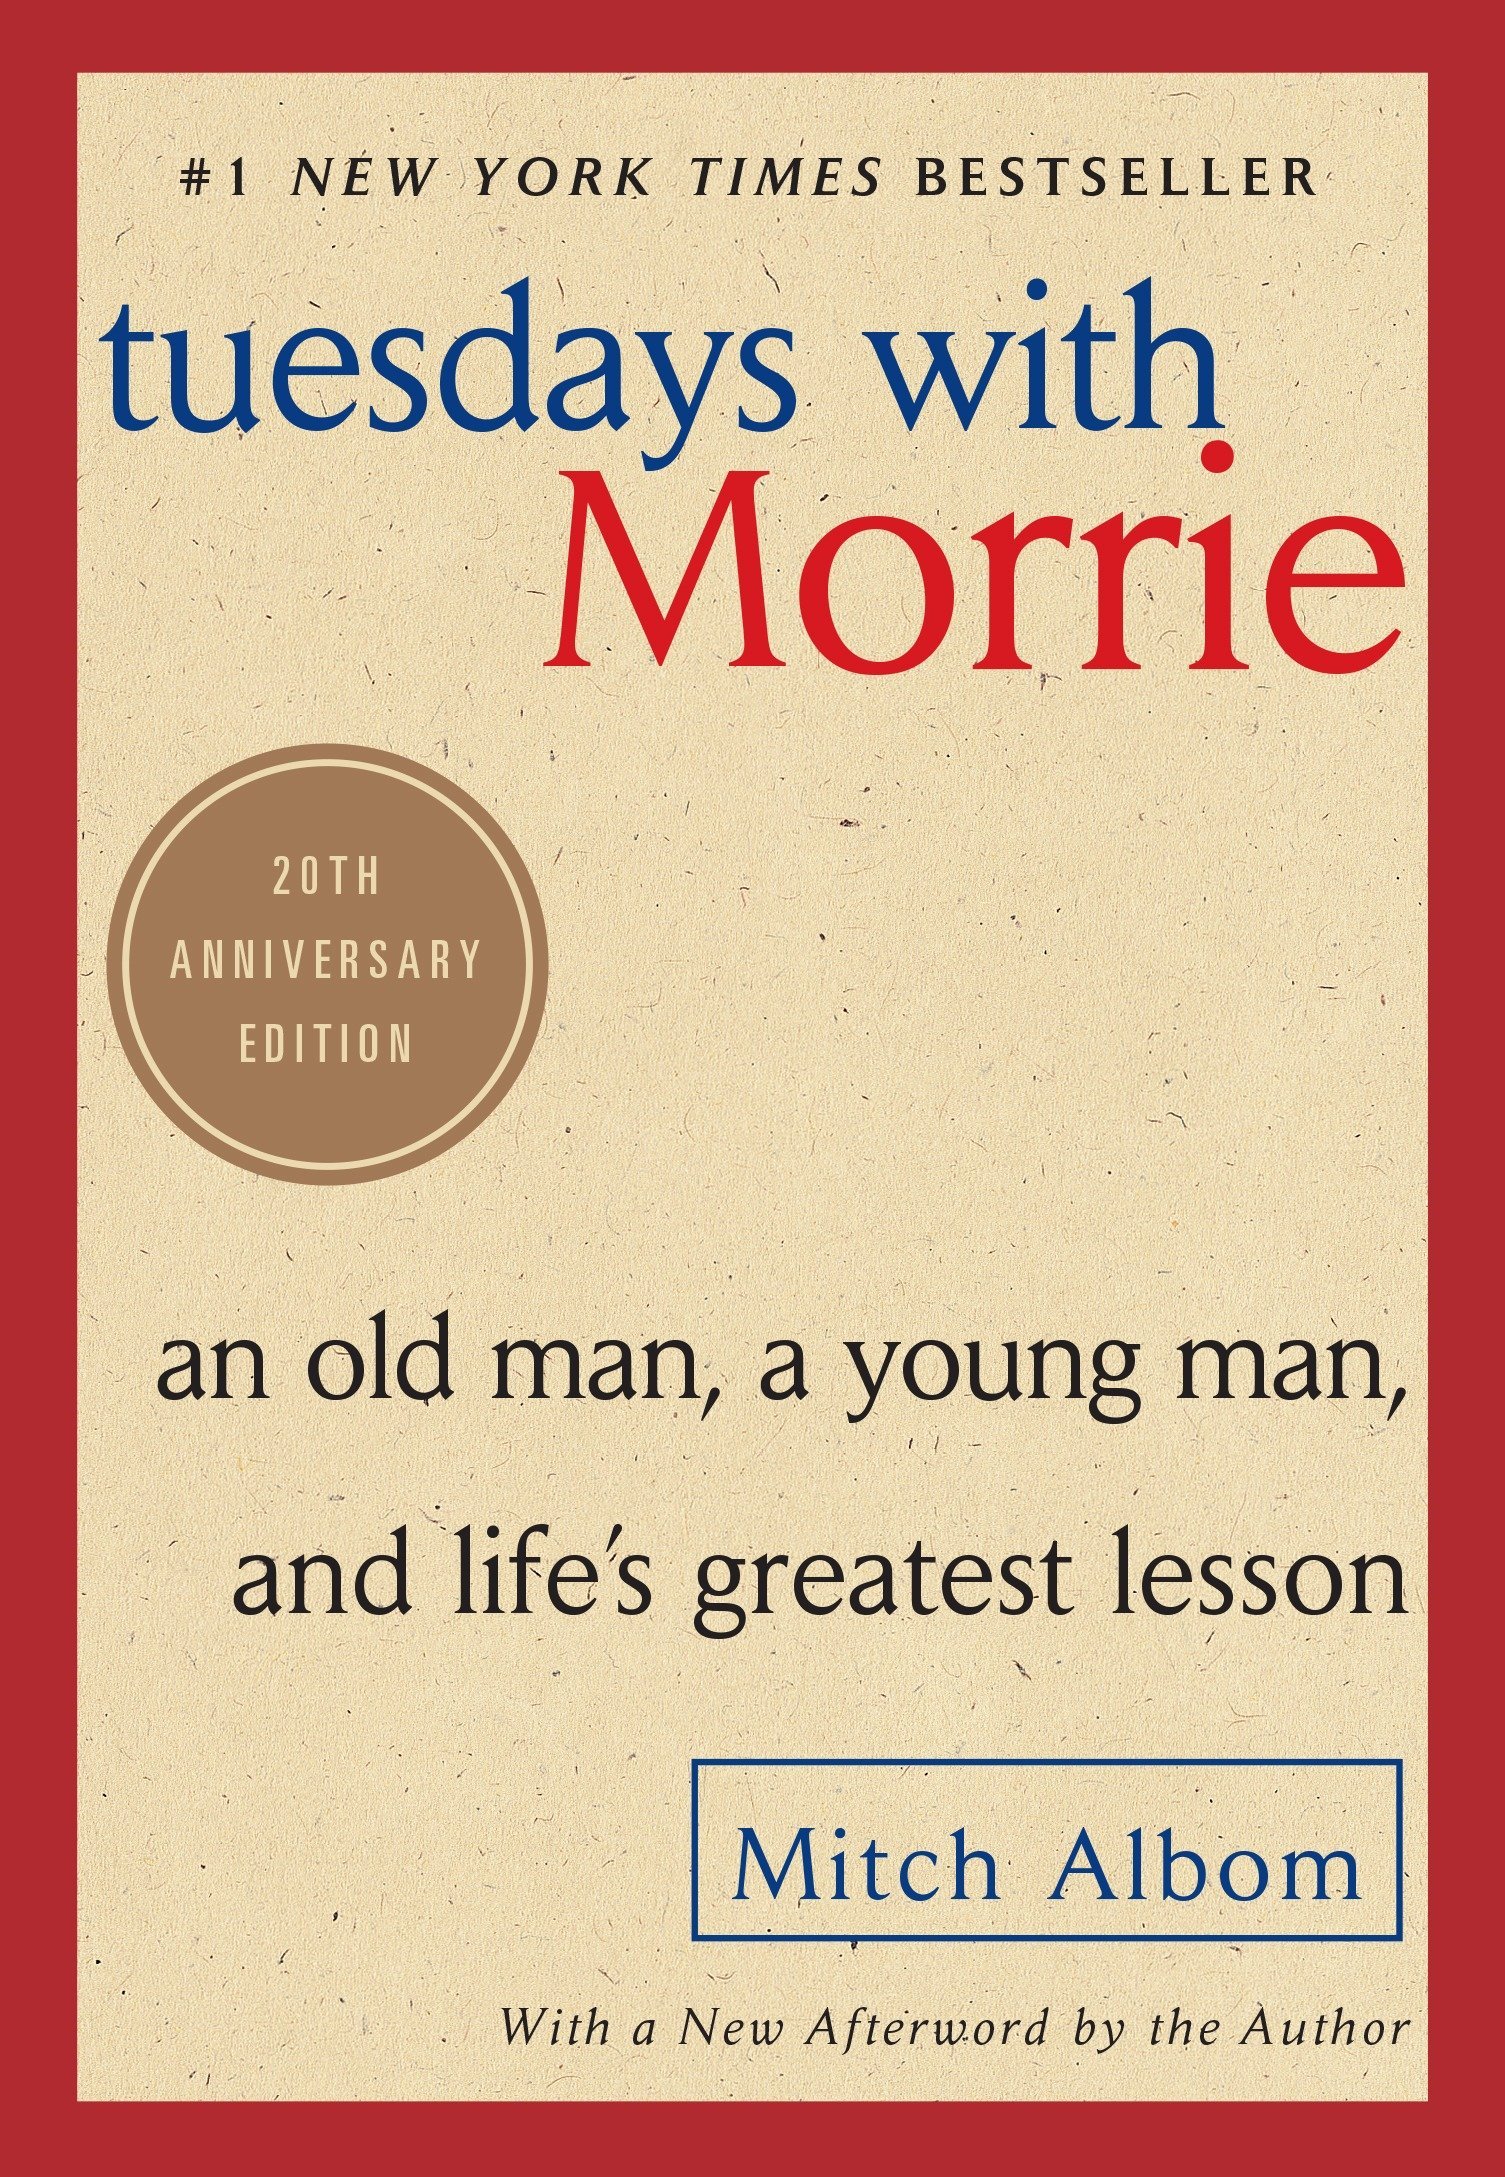 Tuesdays with Morrie books to give as christmas presents